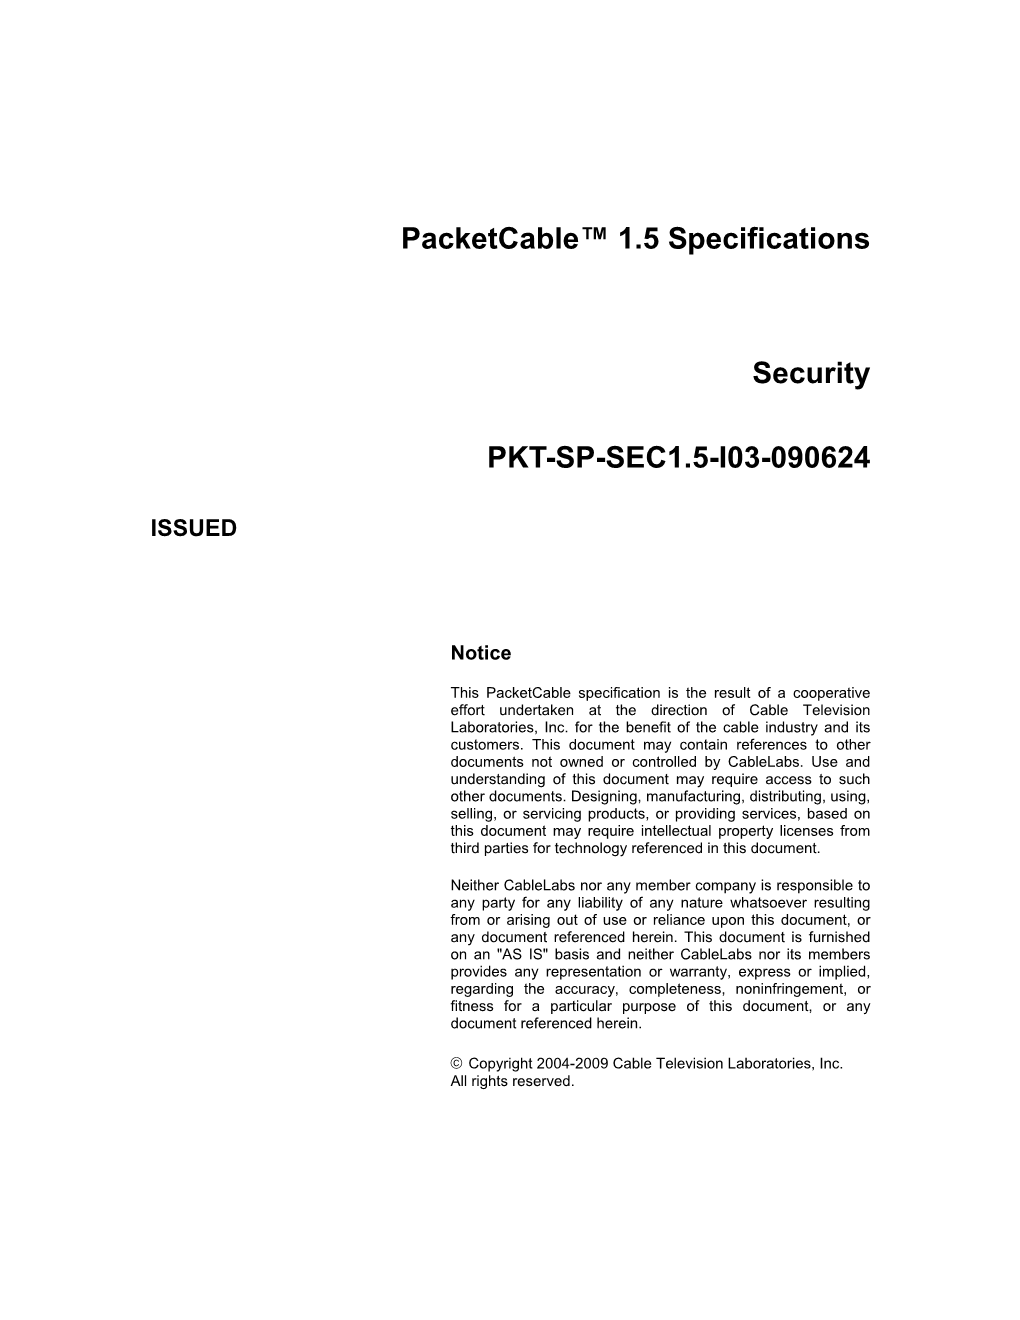 Packetcable™ 1.5 Specifications Security (PKT-SP-SEC1.5-I03